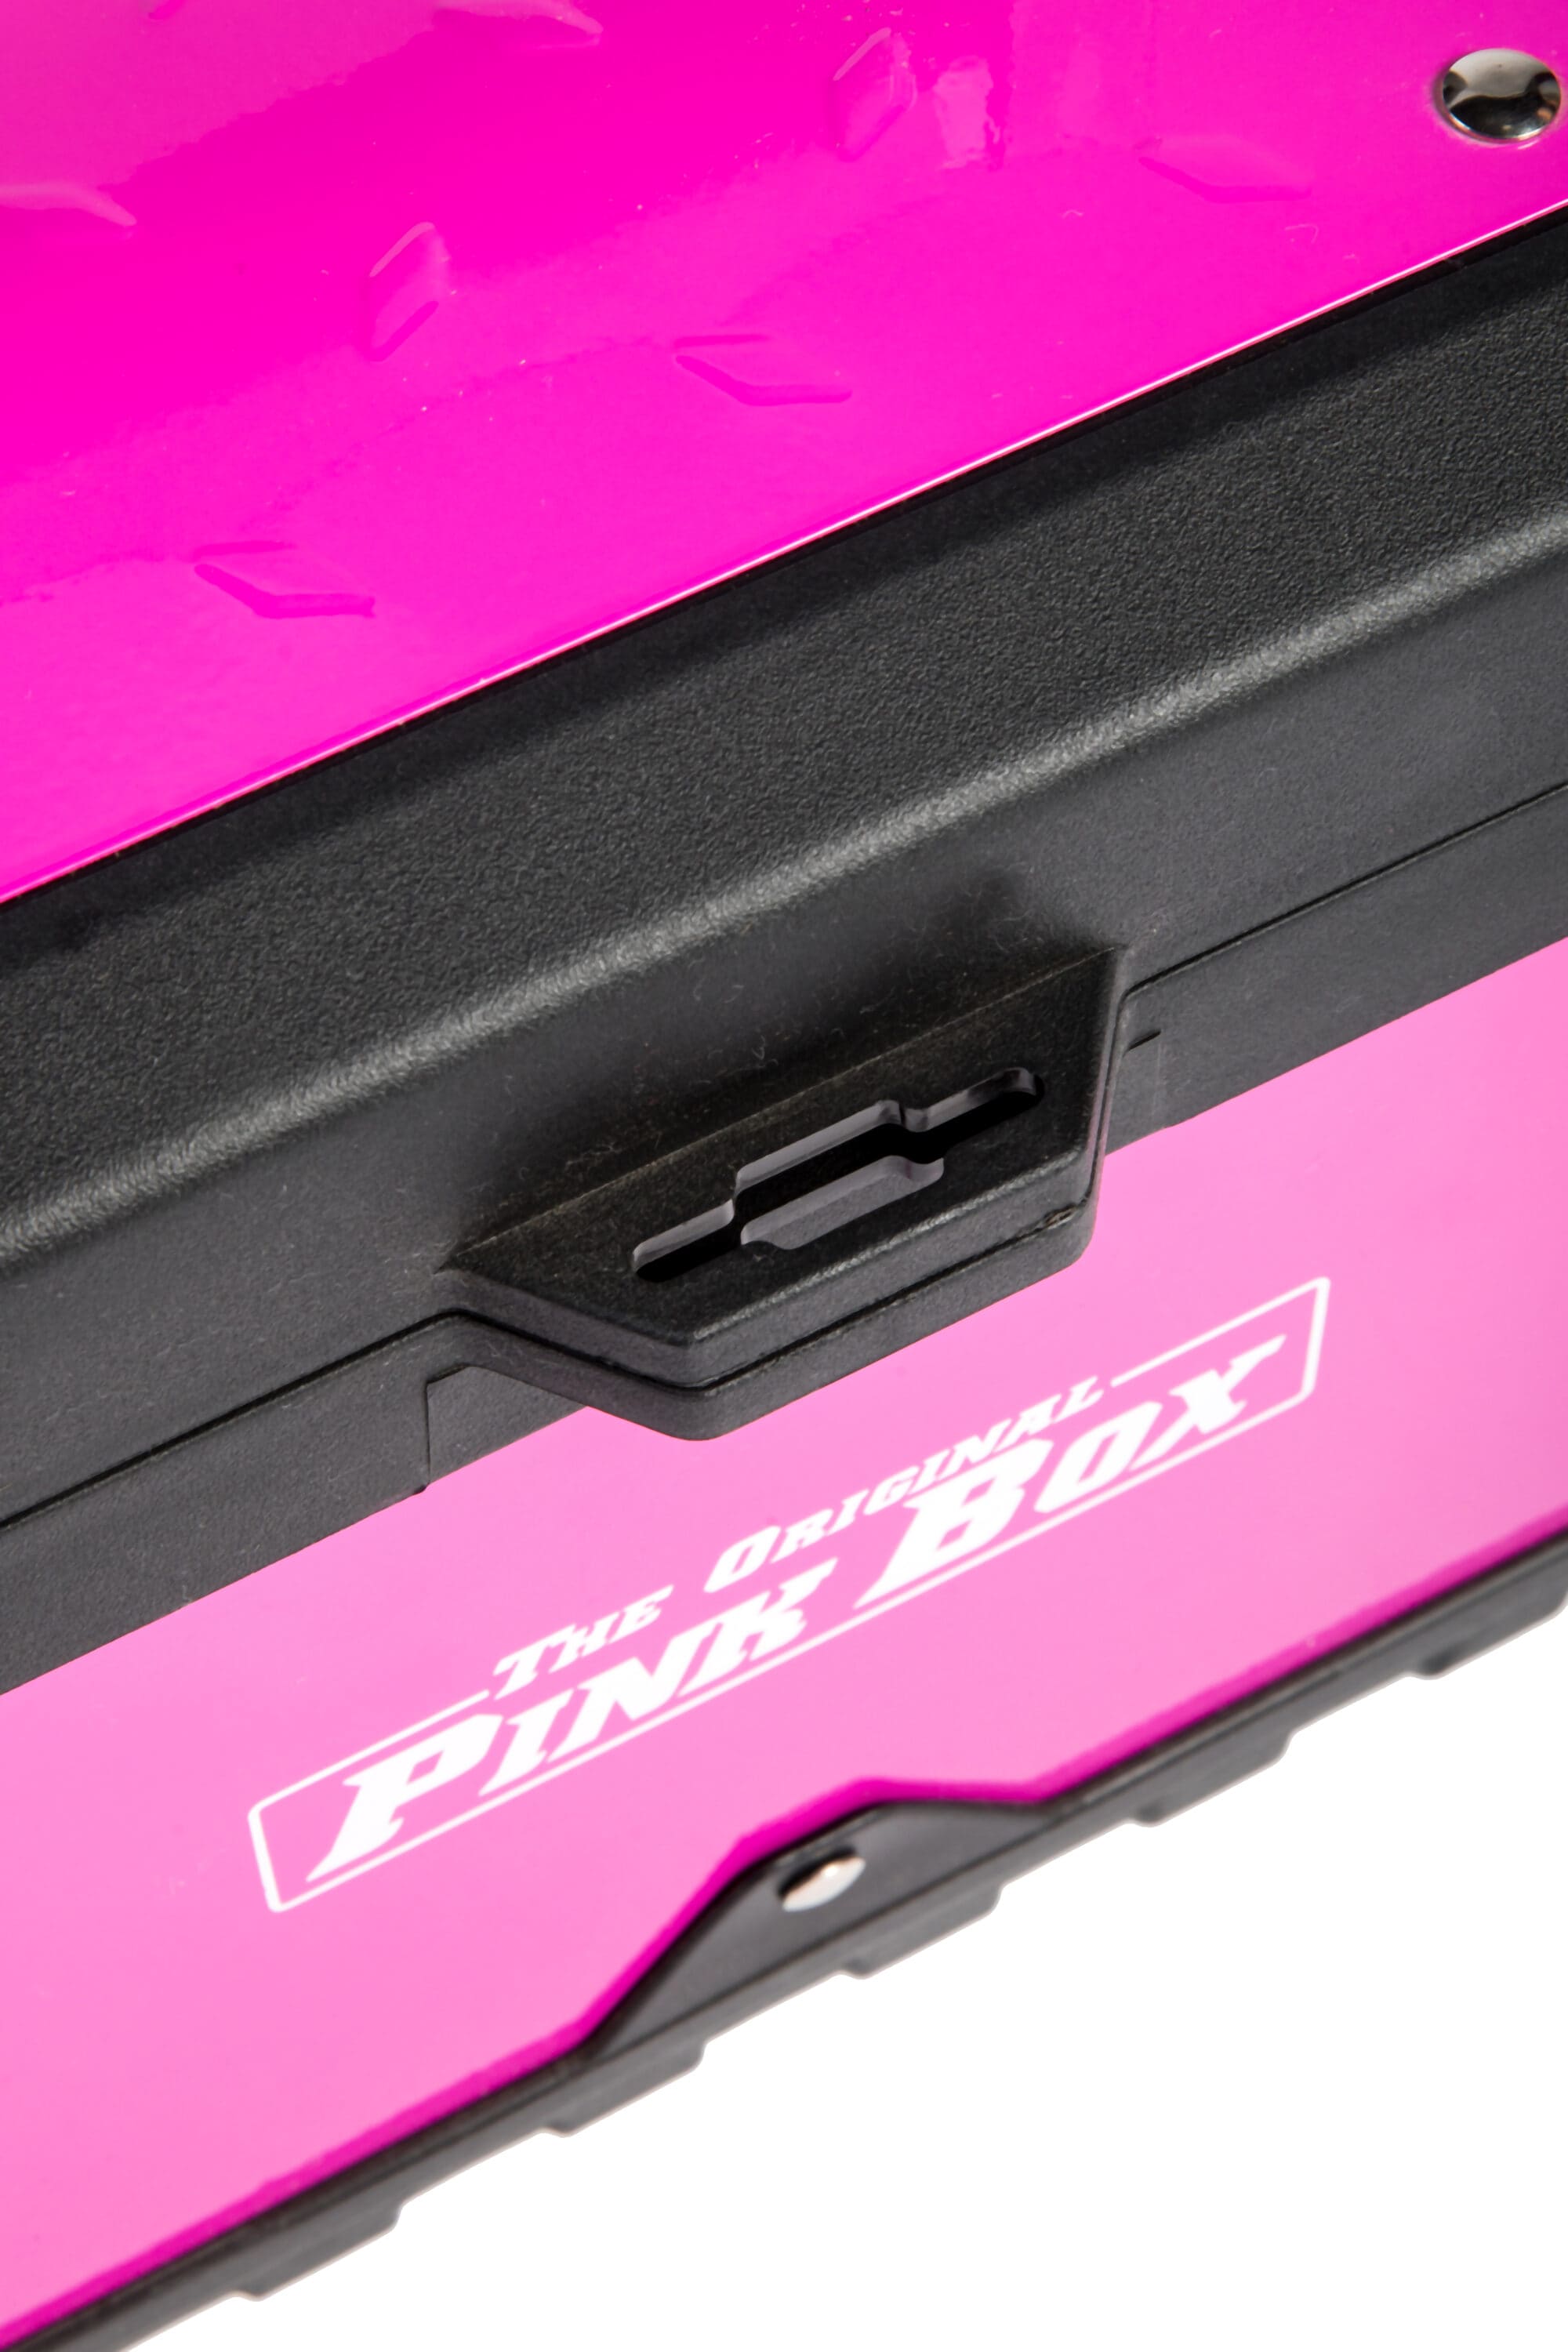 Pink Tool Boxes!!--- gals side--- guys side ( camo , black , lime)